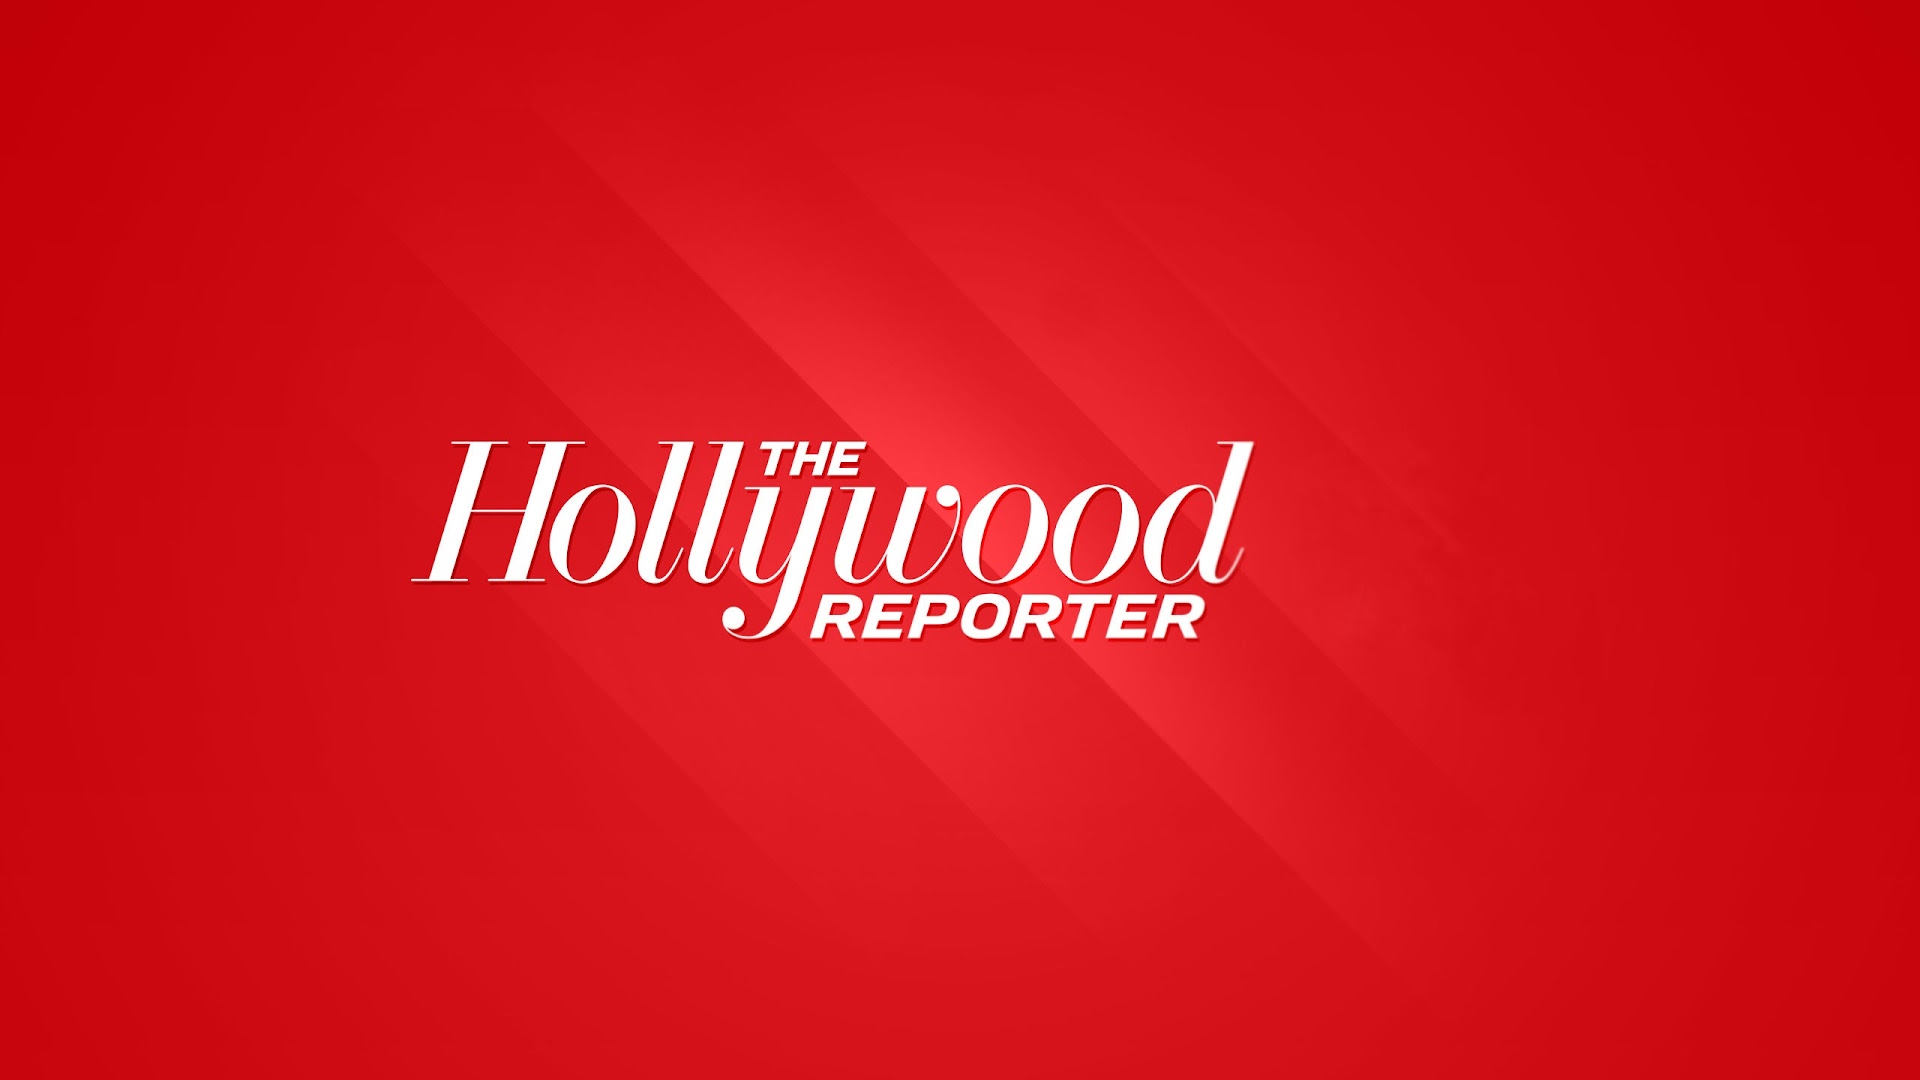 After' Review – The Hollywood Reporter